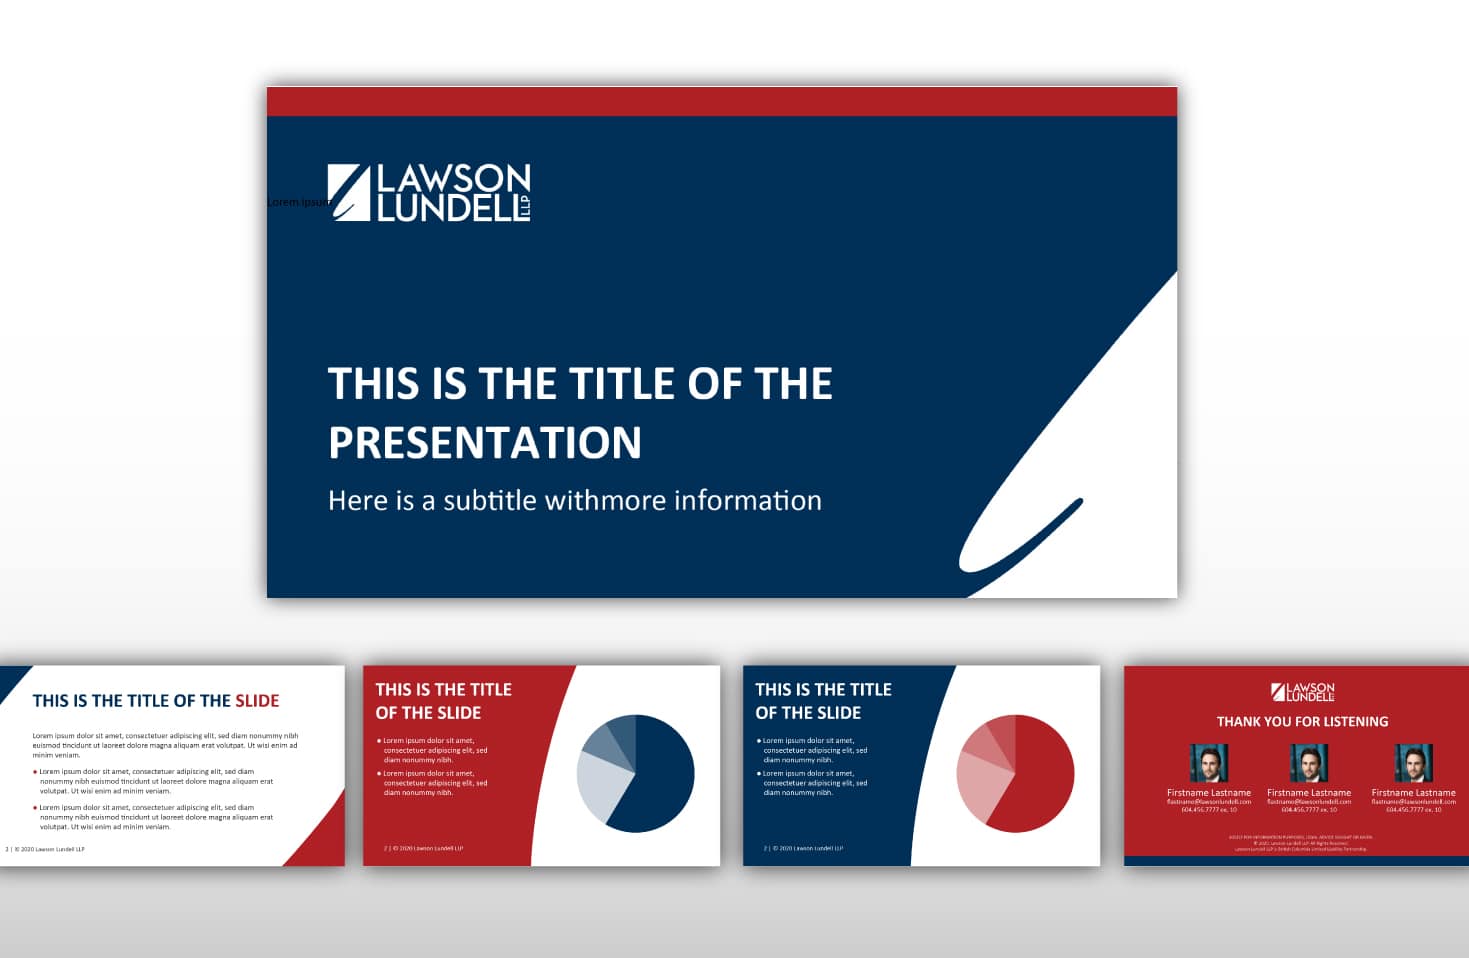 lawson lundell law firm powerpoint template design